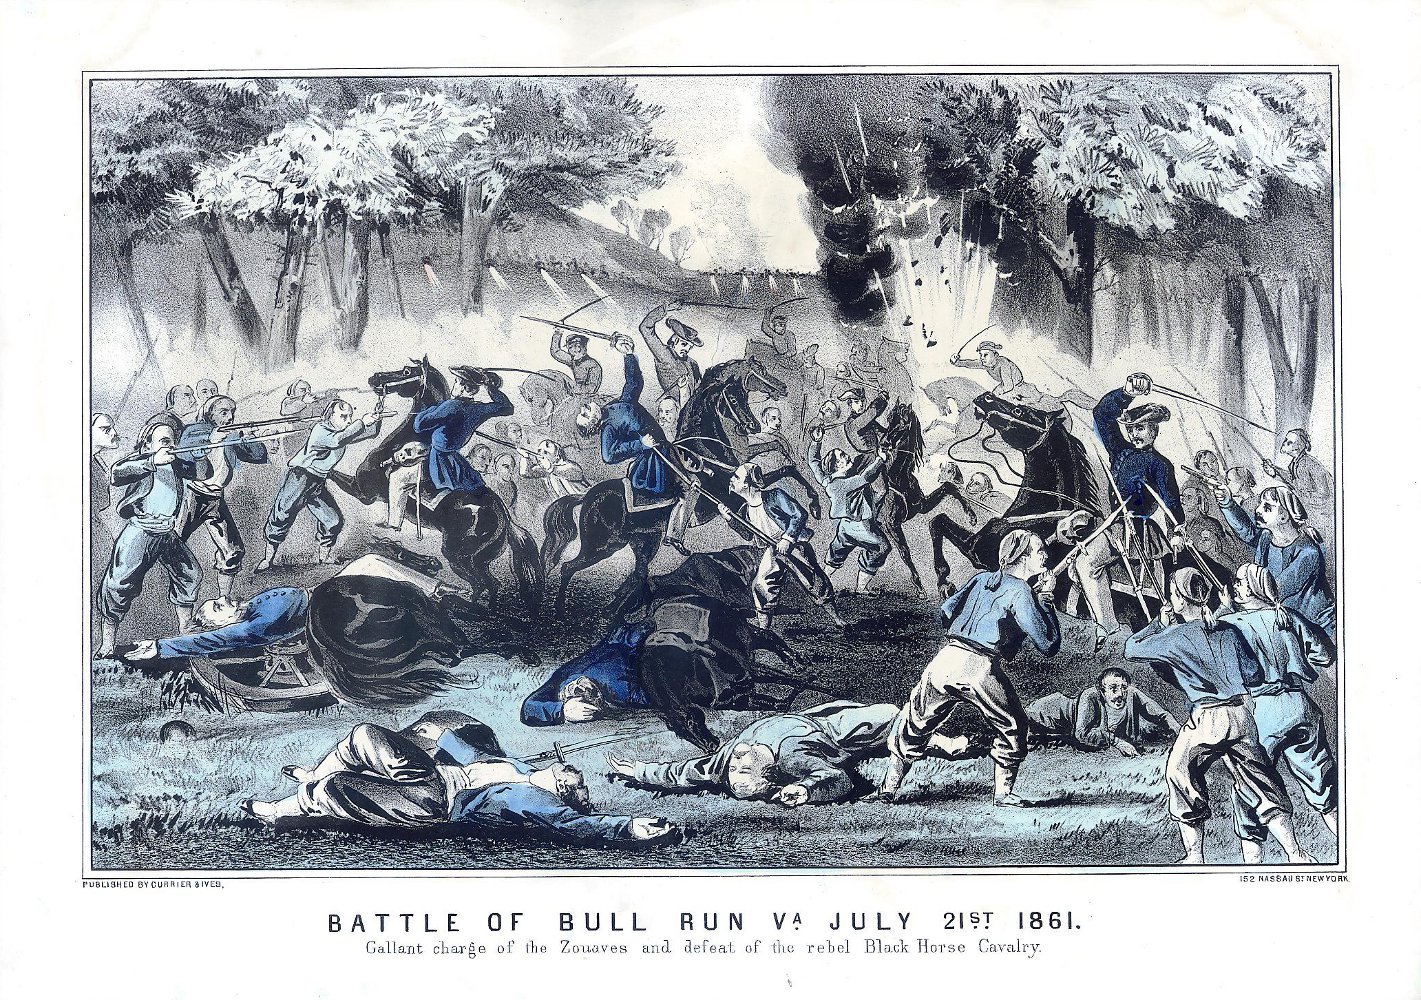 Battle of Bull Run Va July 21st 1861, Gallant Charge of the Zouaves and Defeat of the Rebel Black Horse Cavalry